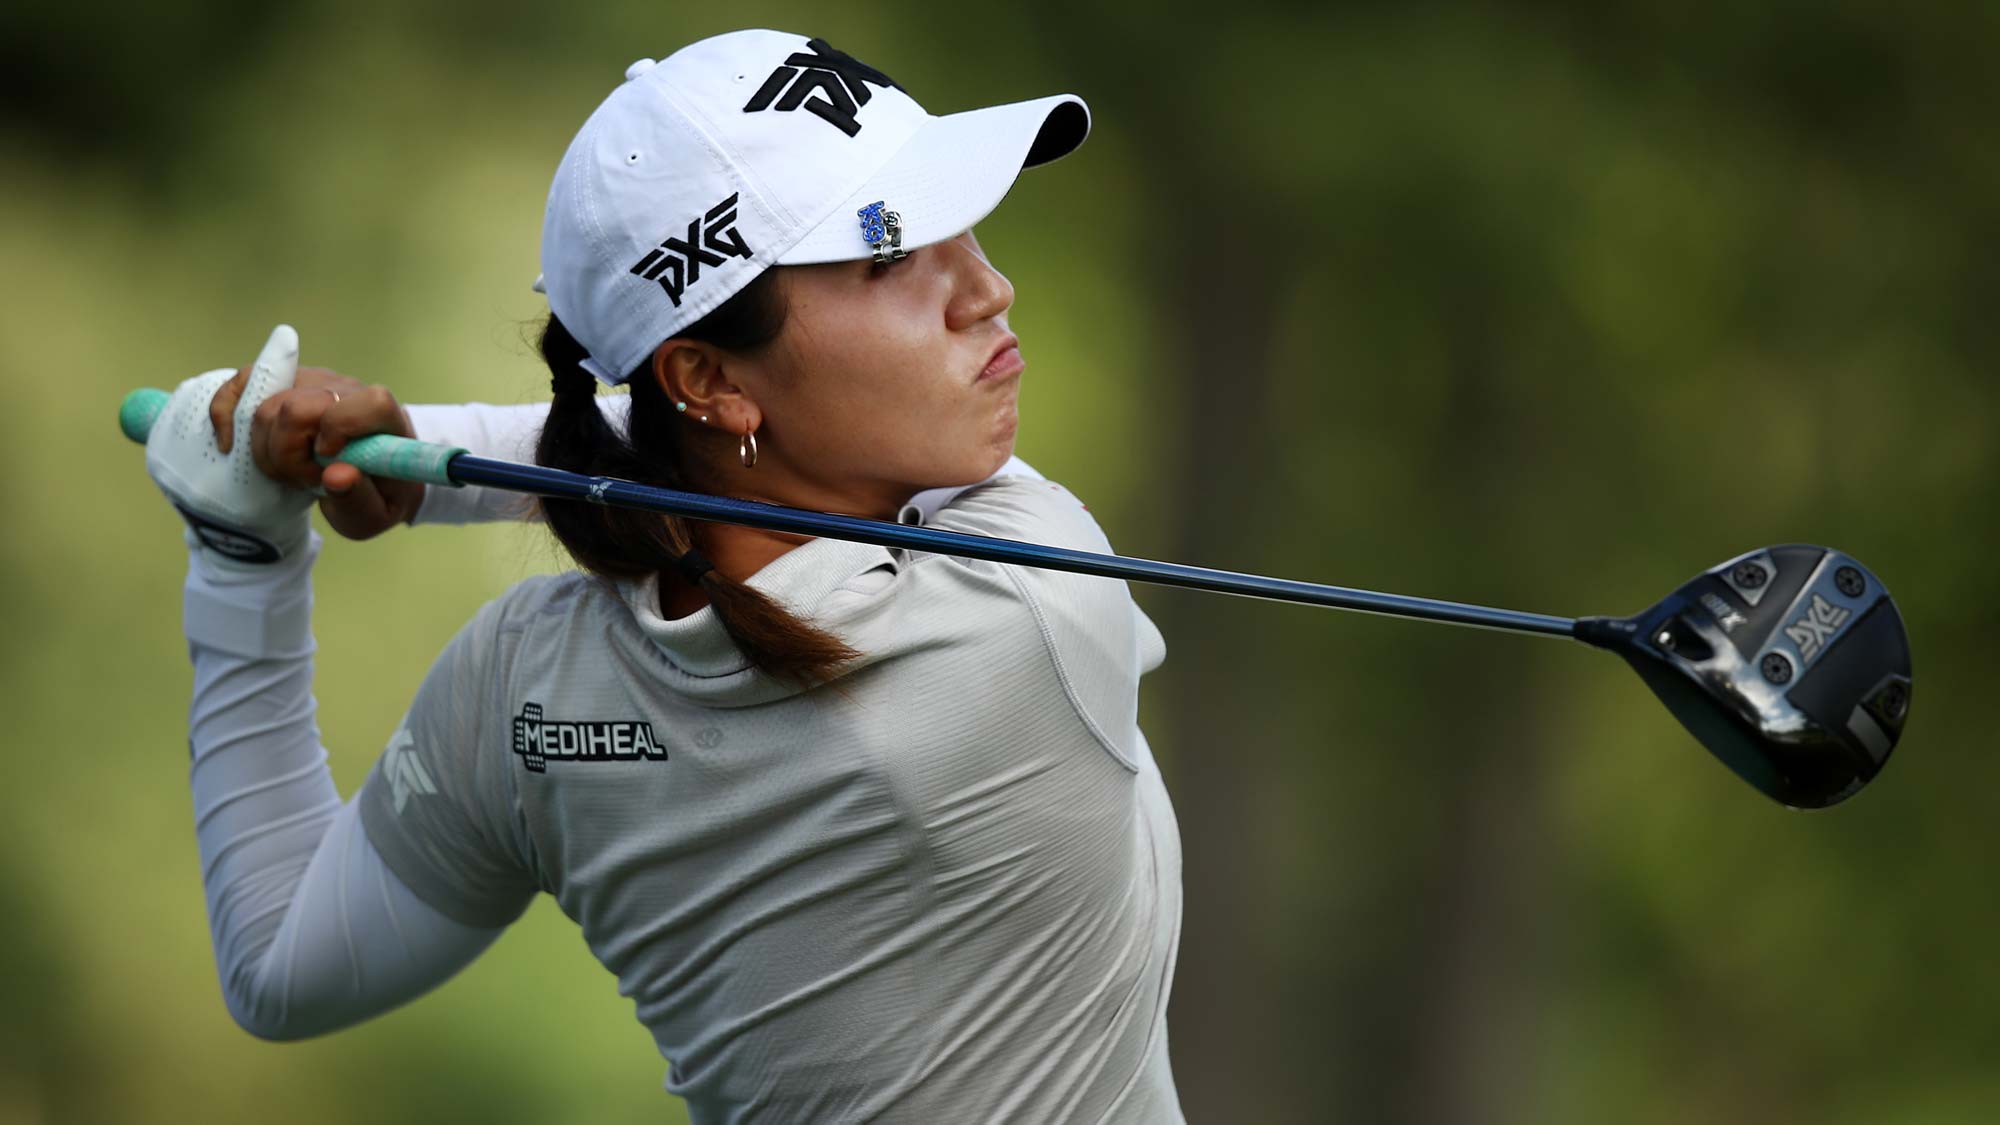 Lydia Ko of New Zealand tees off on the 16th tee during the first round of the LPGA Walmart NW Arkansas Championship